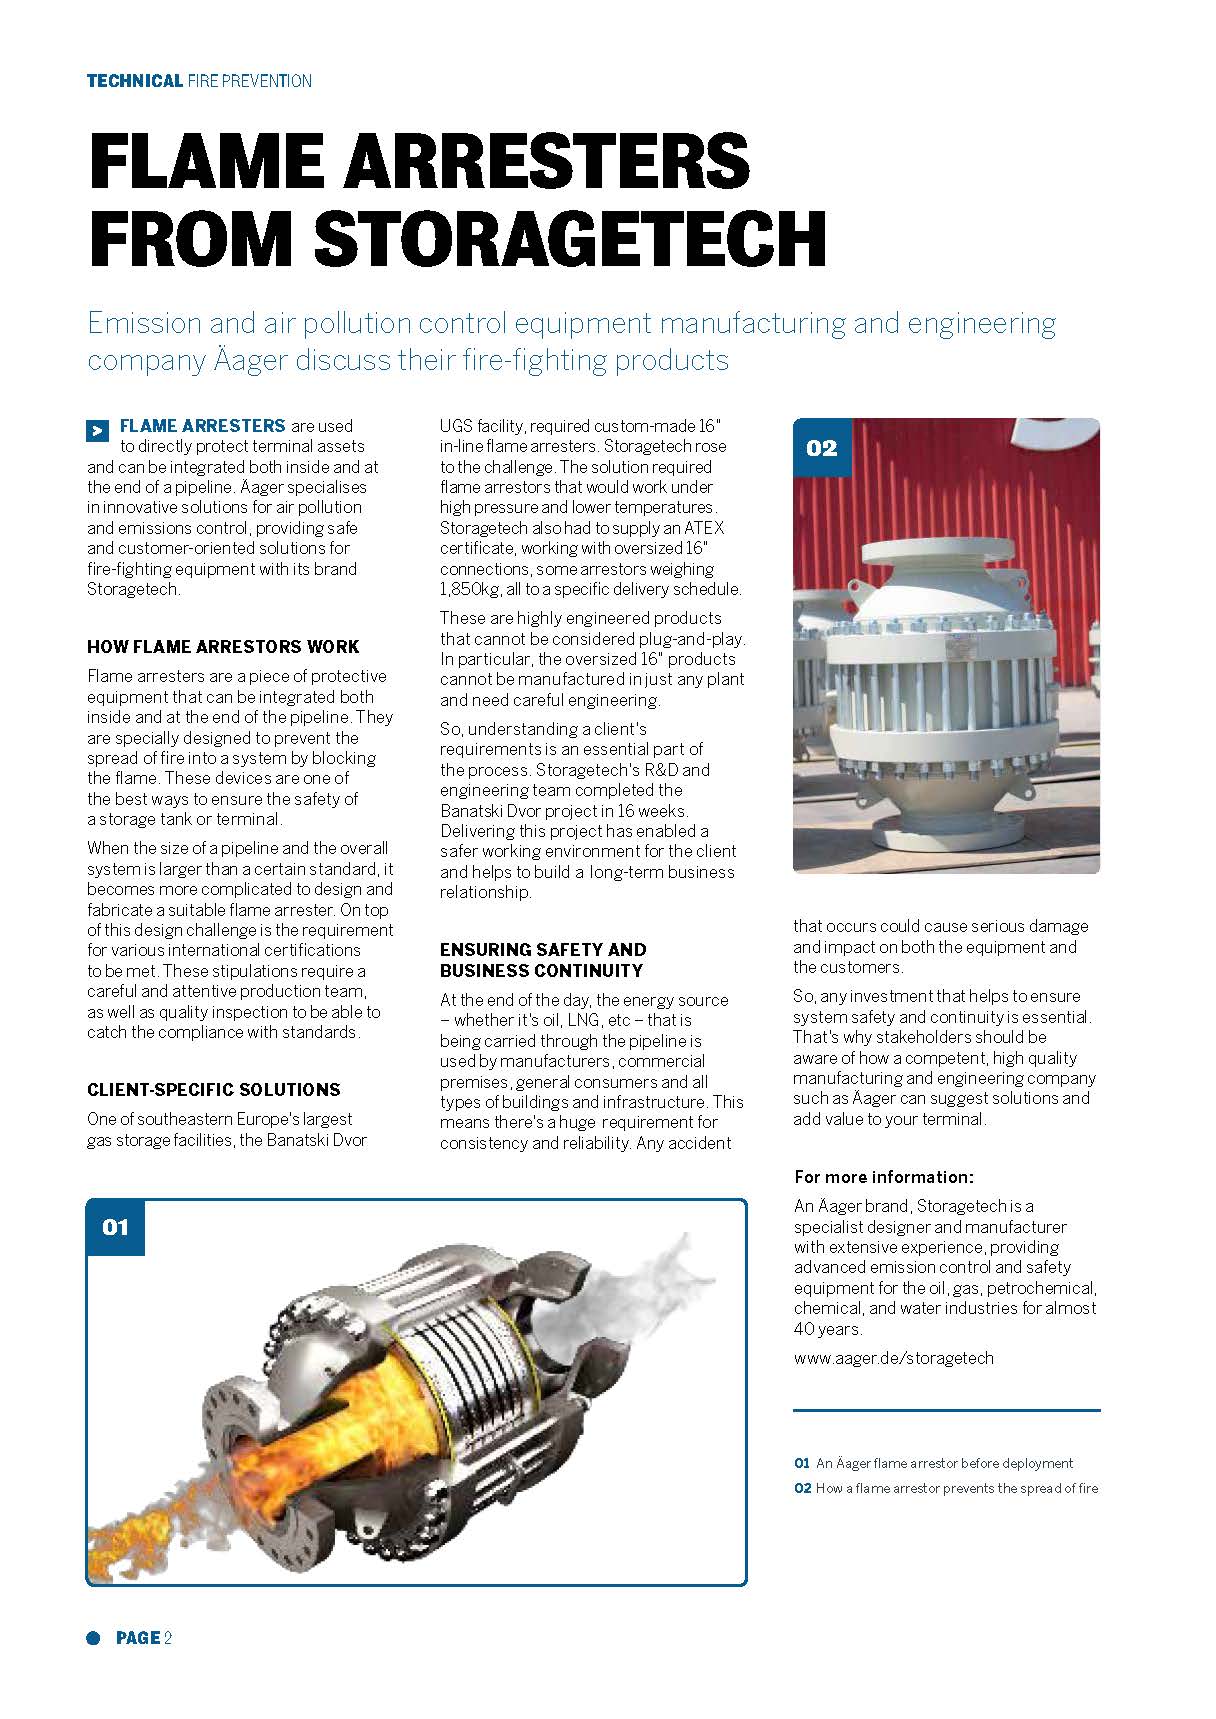 Customer-Oriented Flame Arresters from Storagetech – Tank Storage Magazine Article 13